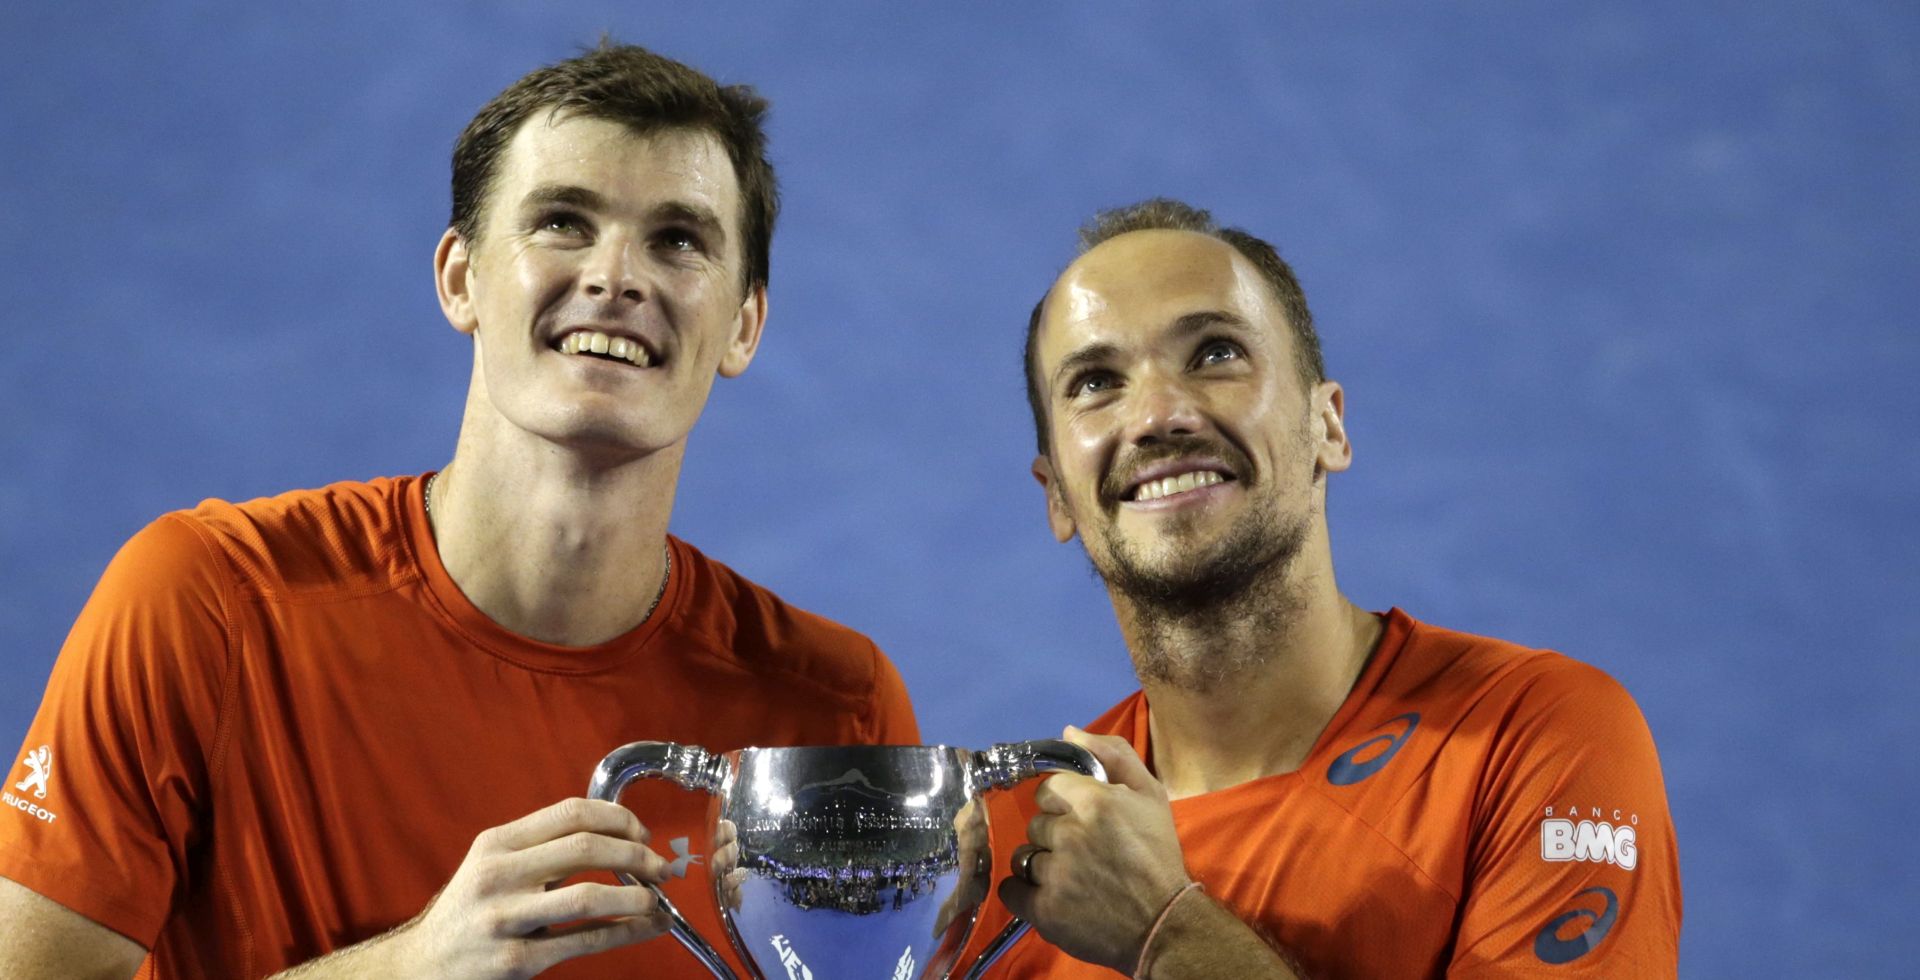 epa05135141 Jamie Murray of Britain (L) and Bruno Soares of Brazil (R) celebrate with winning trophy after their double final match against Daniel Nestor of Canada and Radek Stepanek of Czech Republic at the Australian Open tennis tournament in Melbourne, Australia, 30 January 2016.  EPA/LYNN BO BO